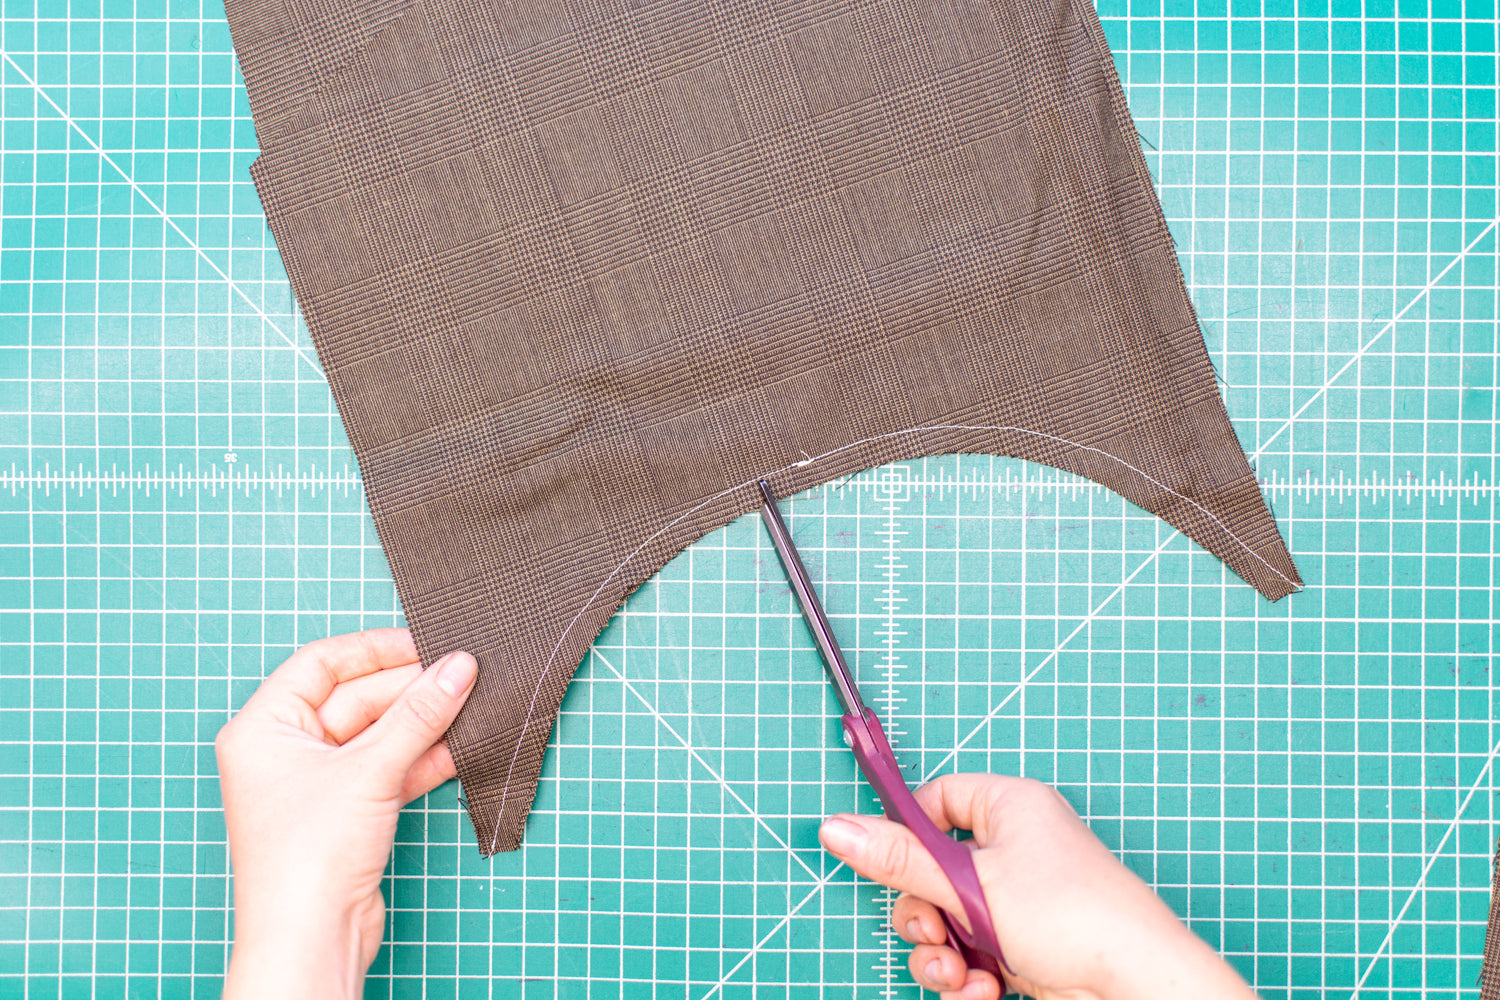 How To Sew Pants: Work Pants  Fabric Wholesale Direct Blog